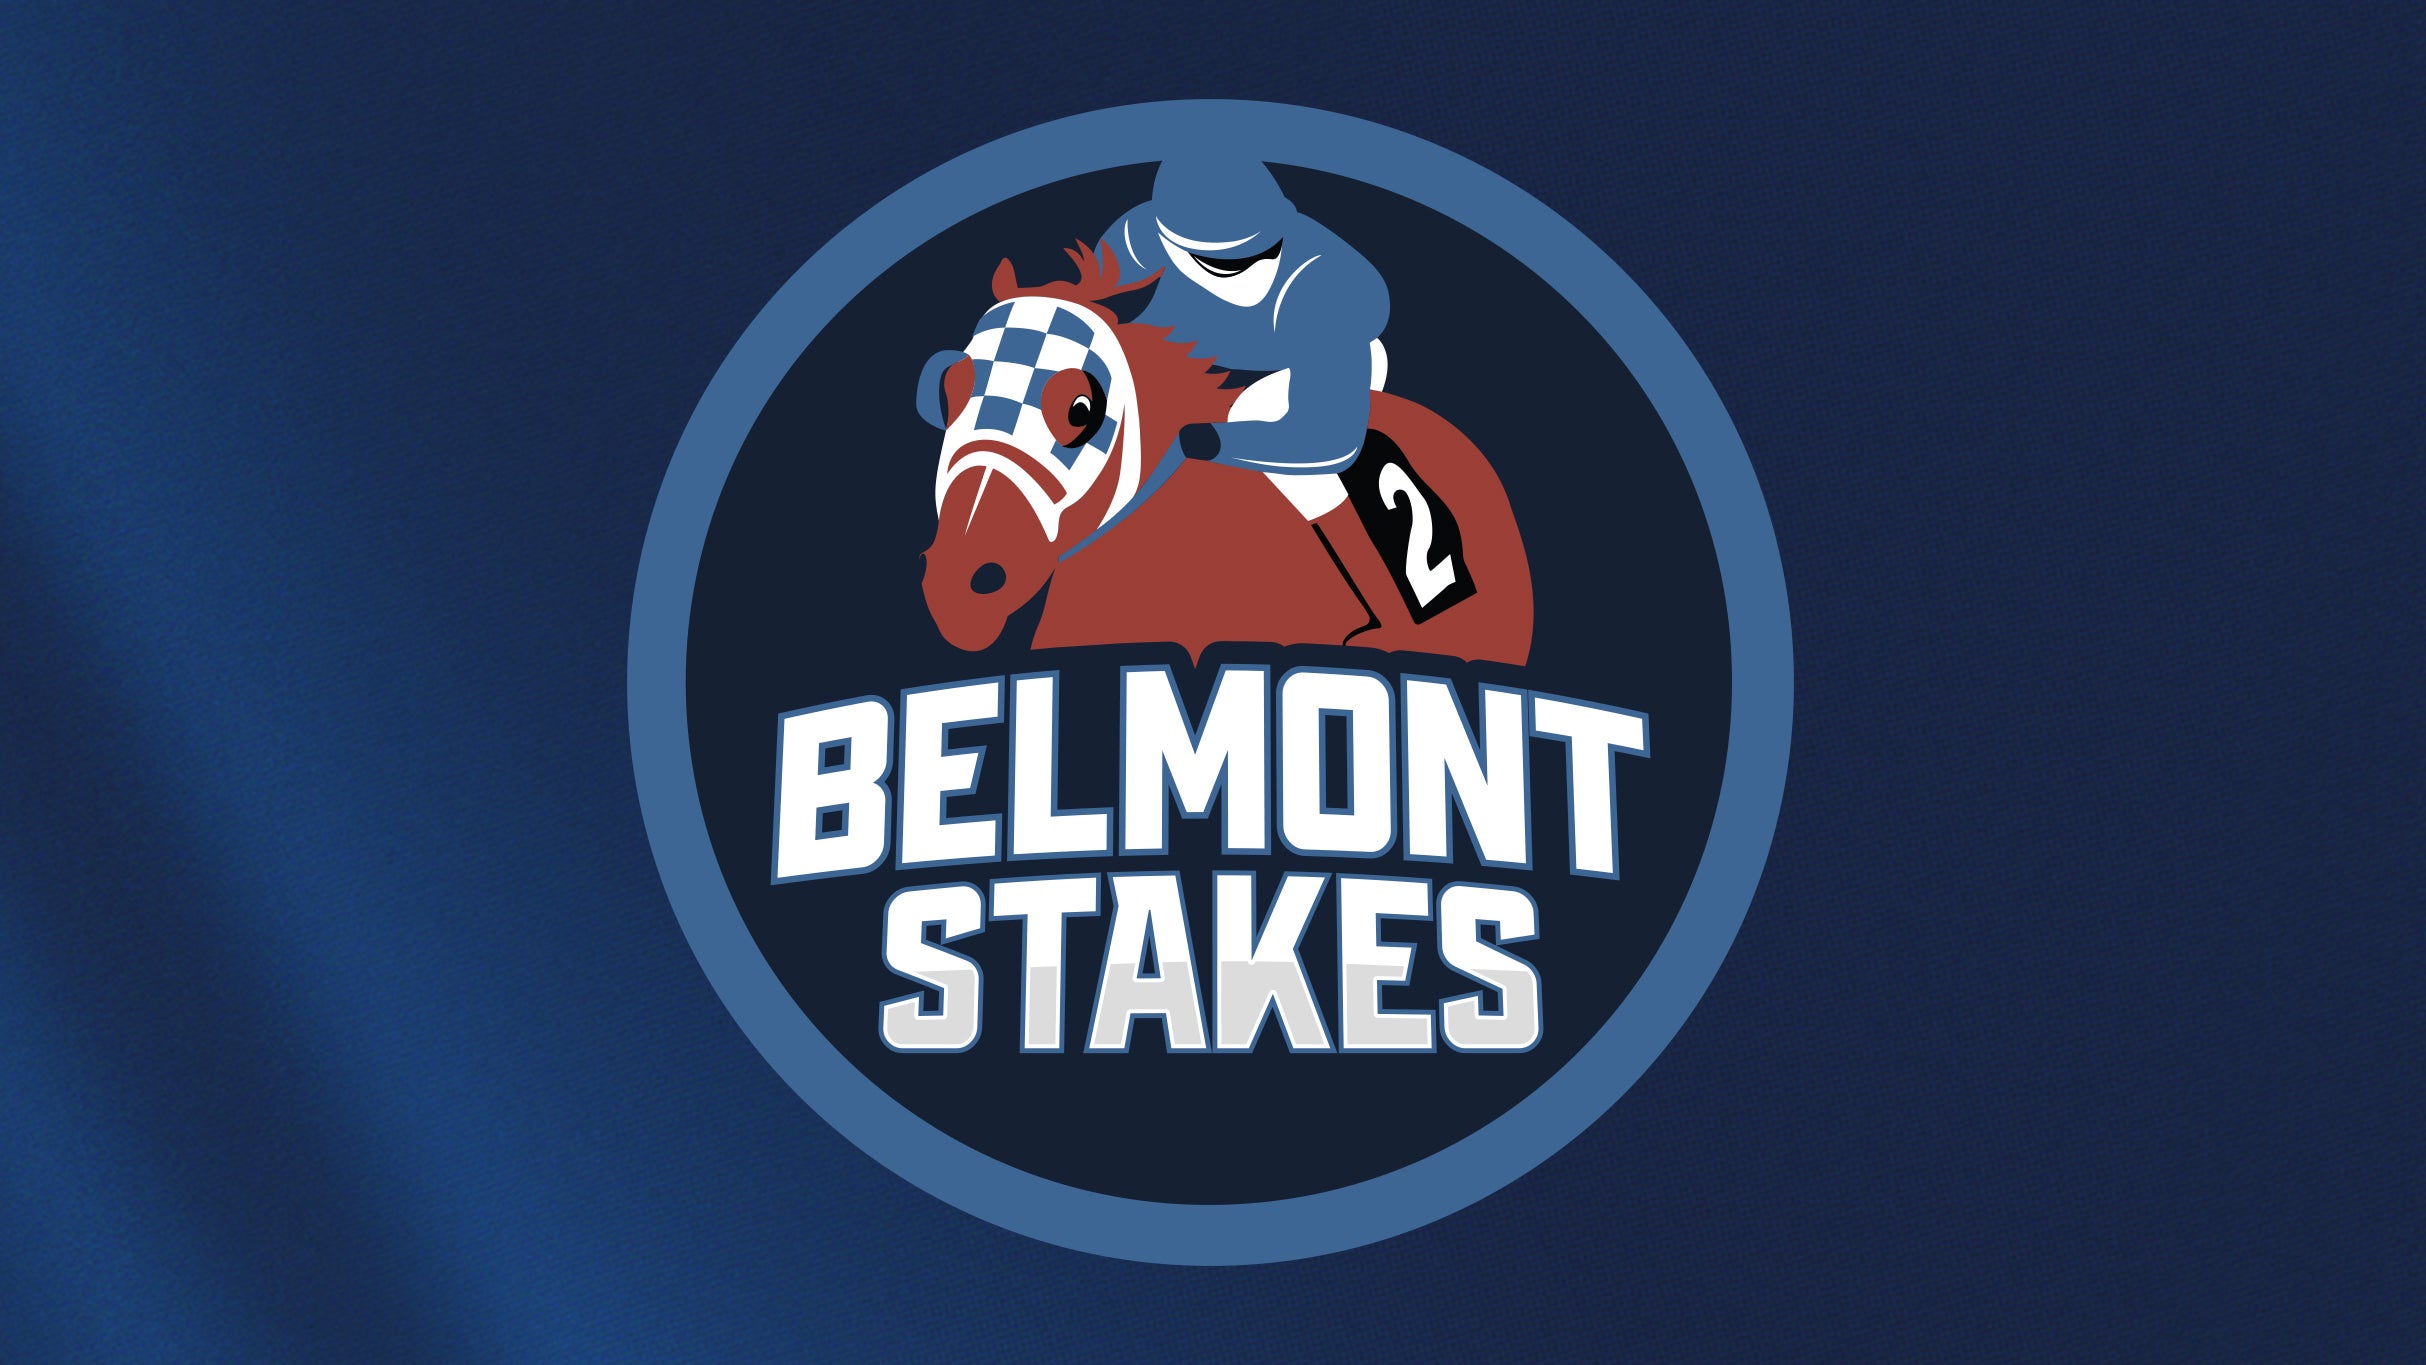 2023 Belmont Stakes - Reserved Dining at Belmont Park